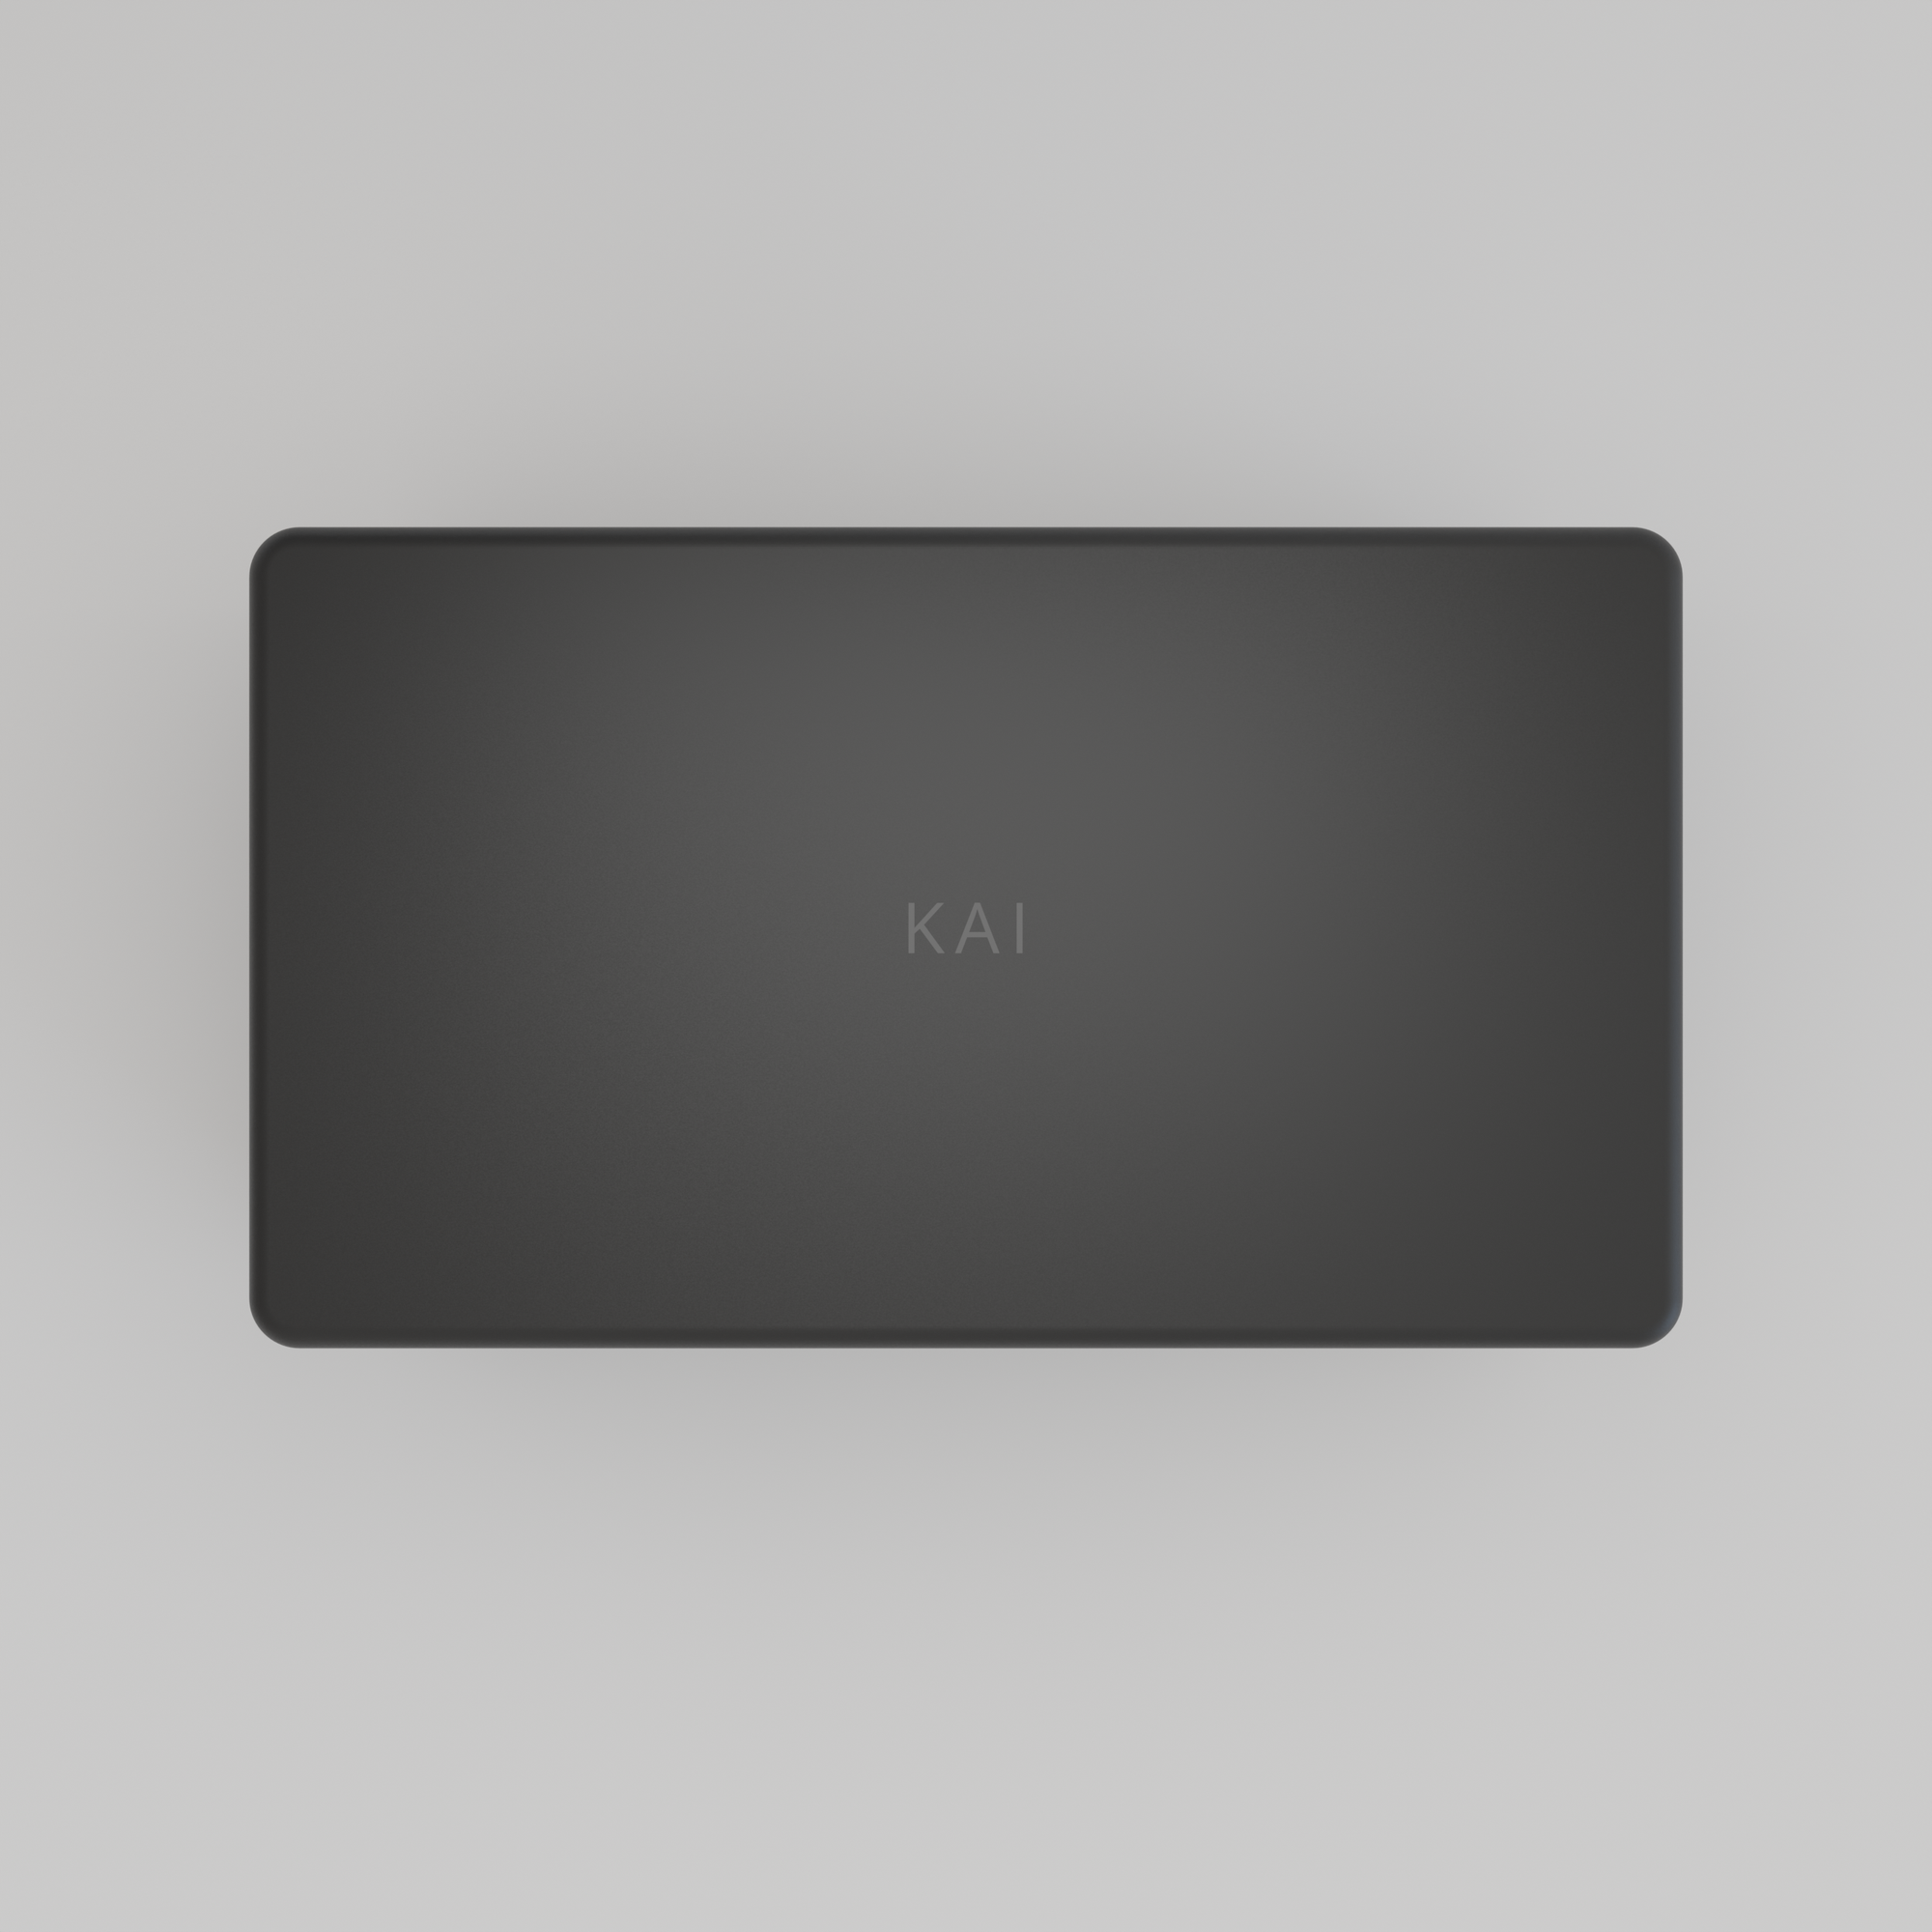 KAI AI Smart Controller pictured from the top, showing off KAI logo.